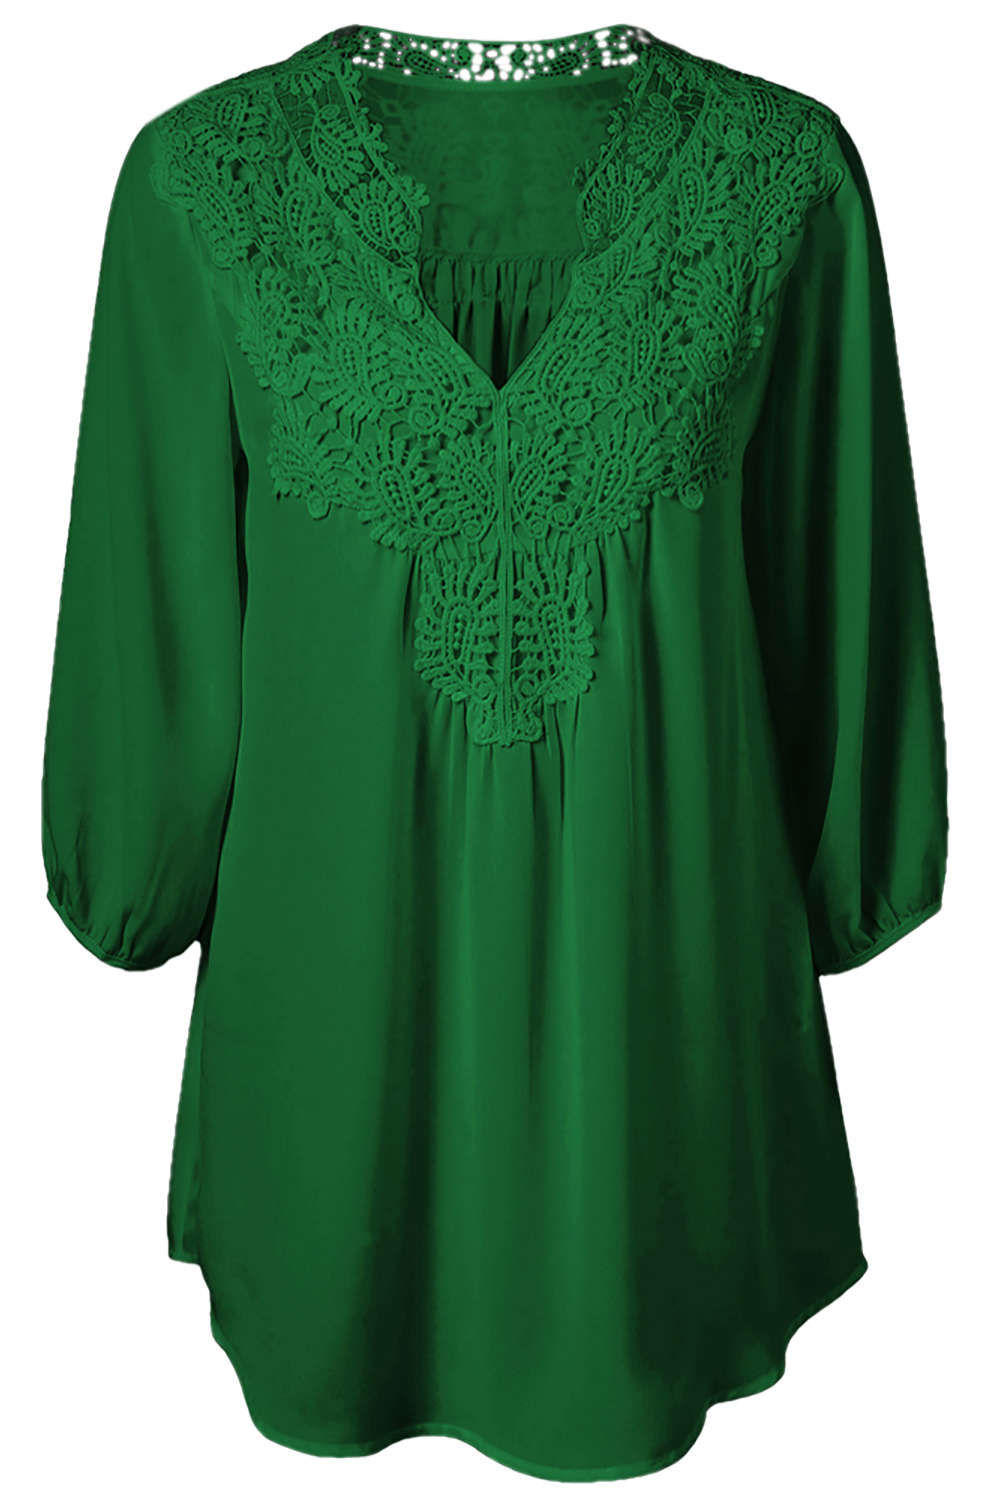 Iyasson Women's Stand Collar Lace Plus Size Tunic Blouse